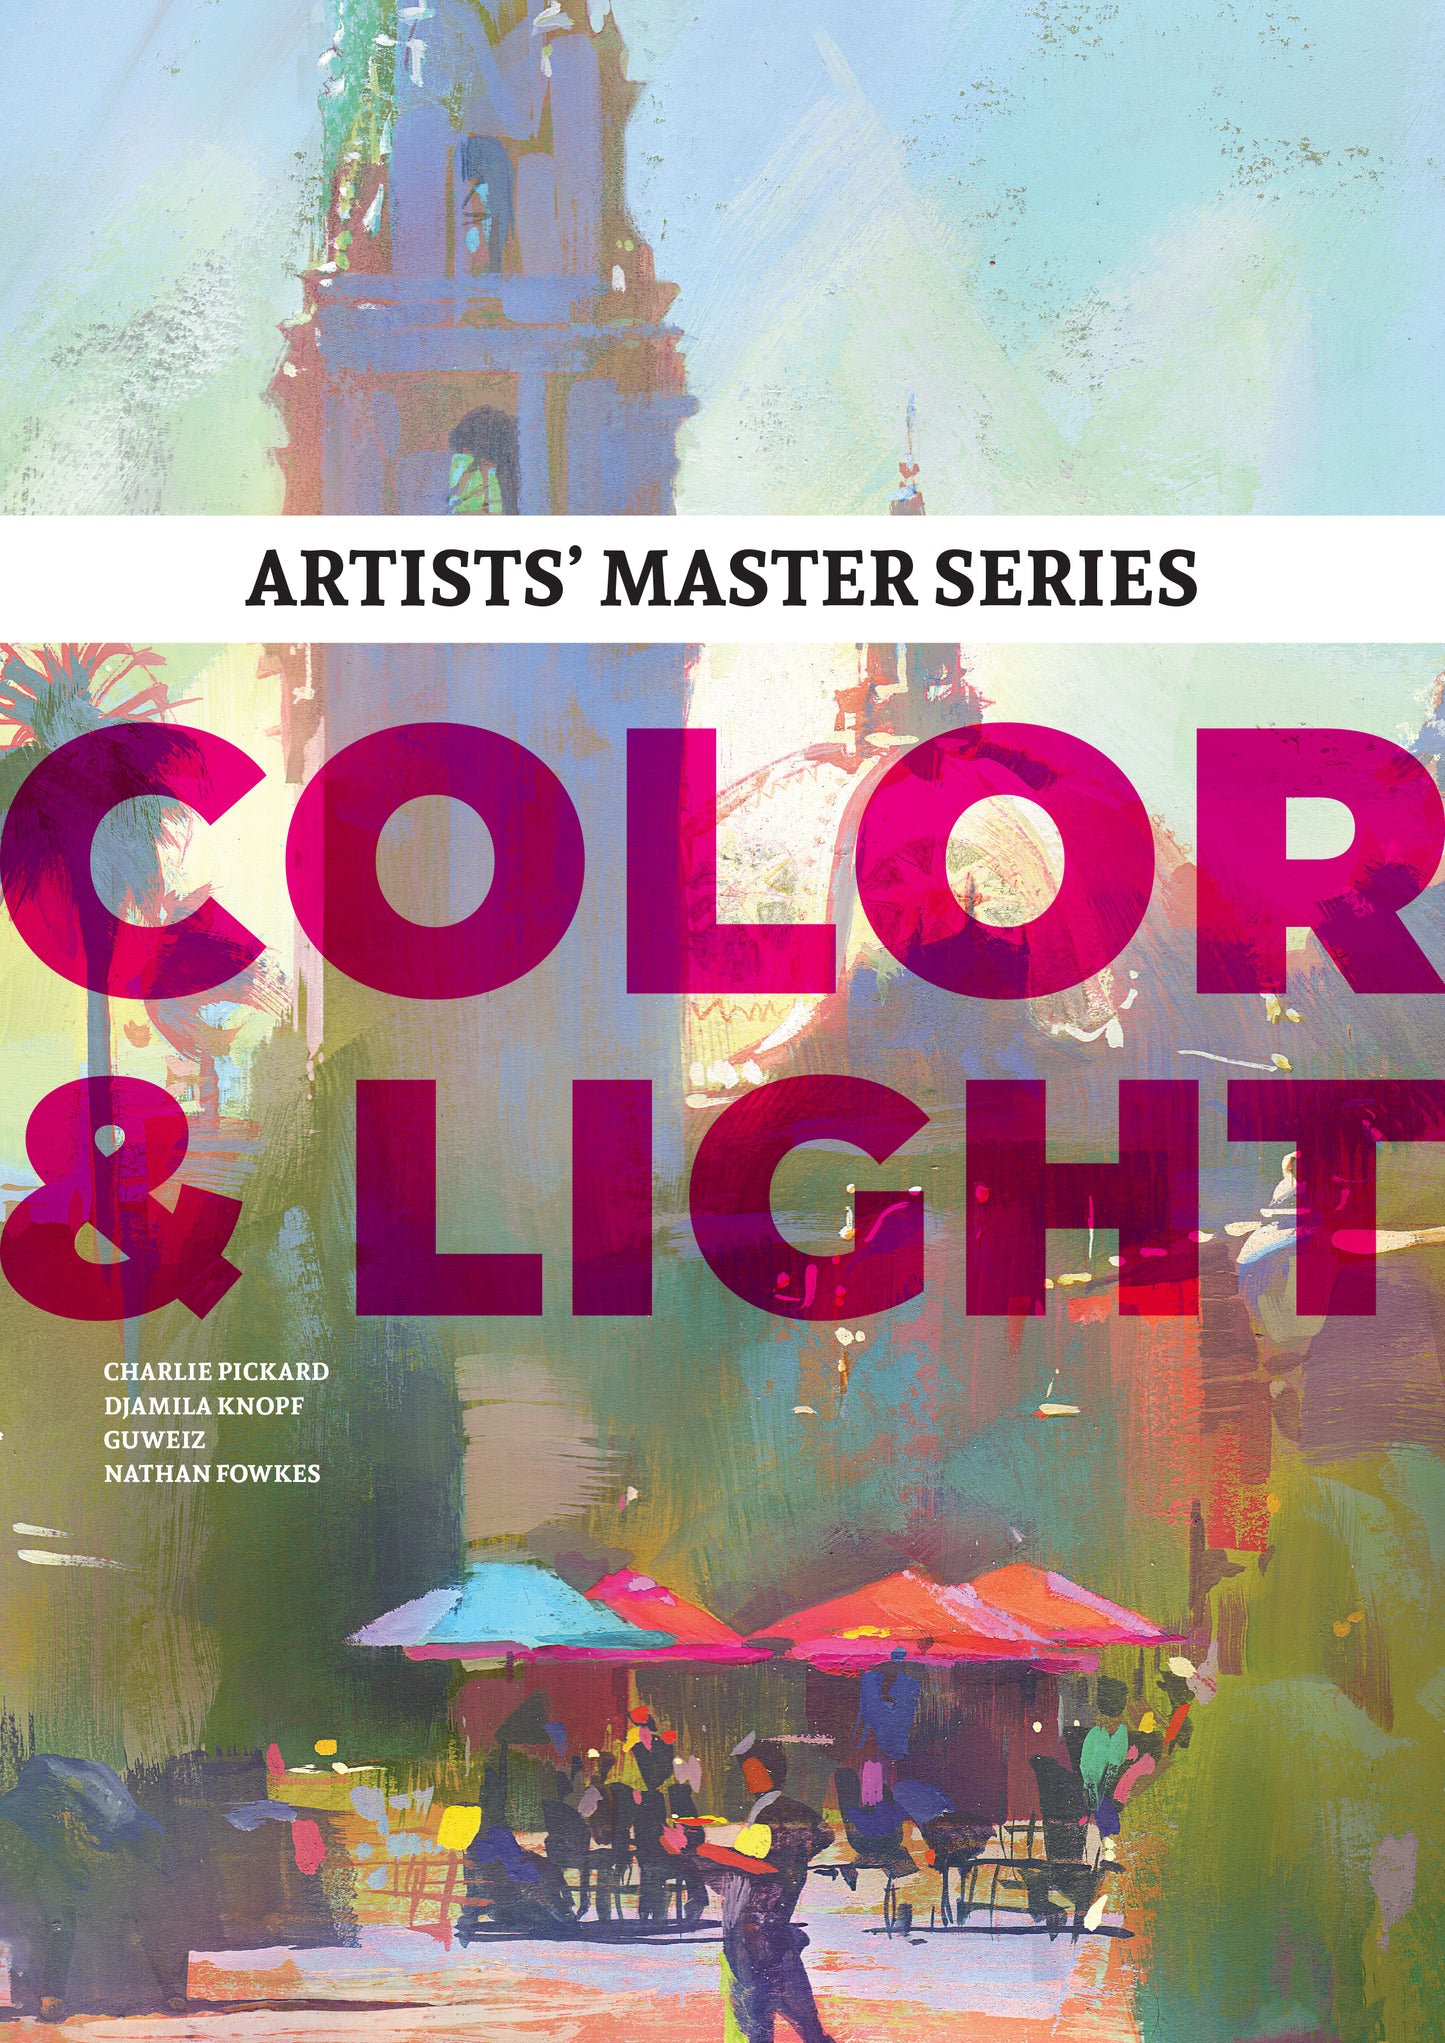 Traditional art style showing a cafe as the book cover saying 'Artists' Master Series: Color and Light' 